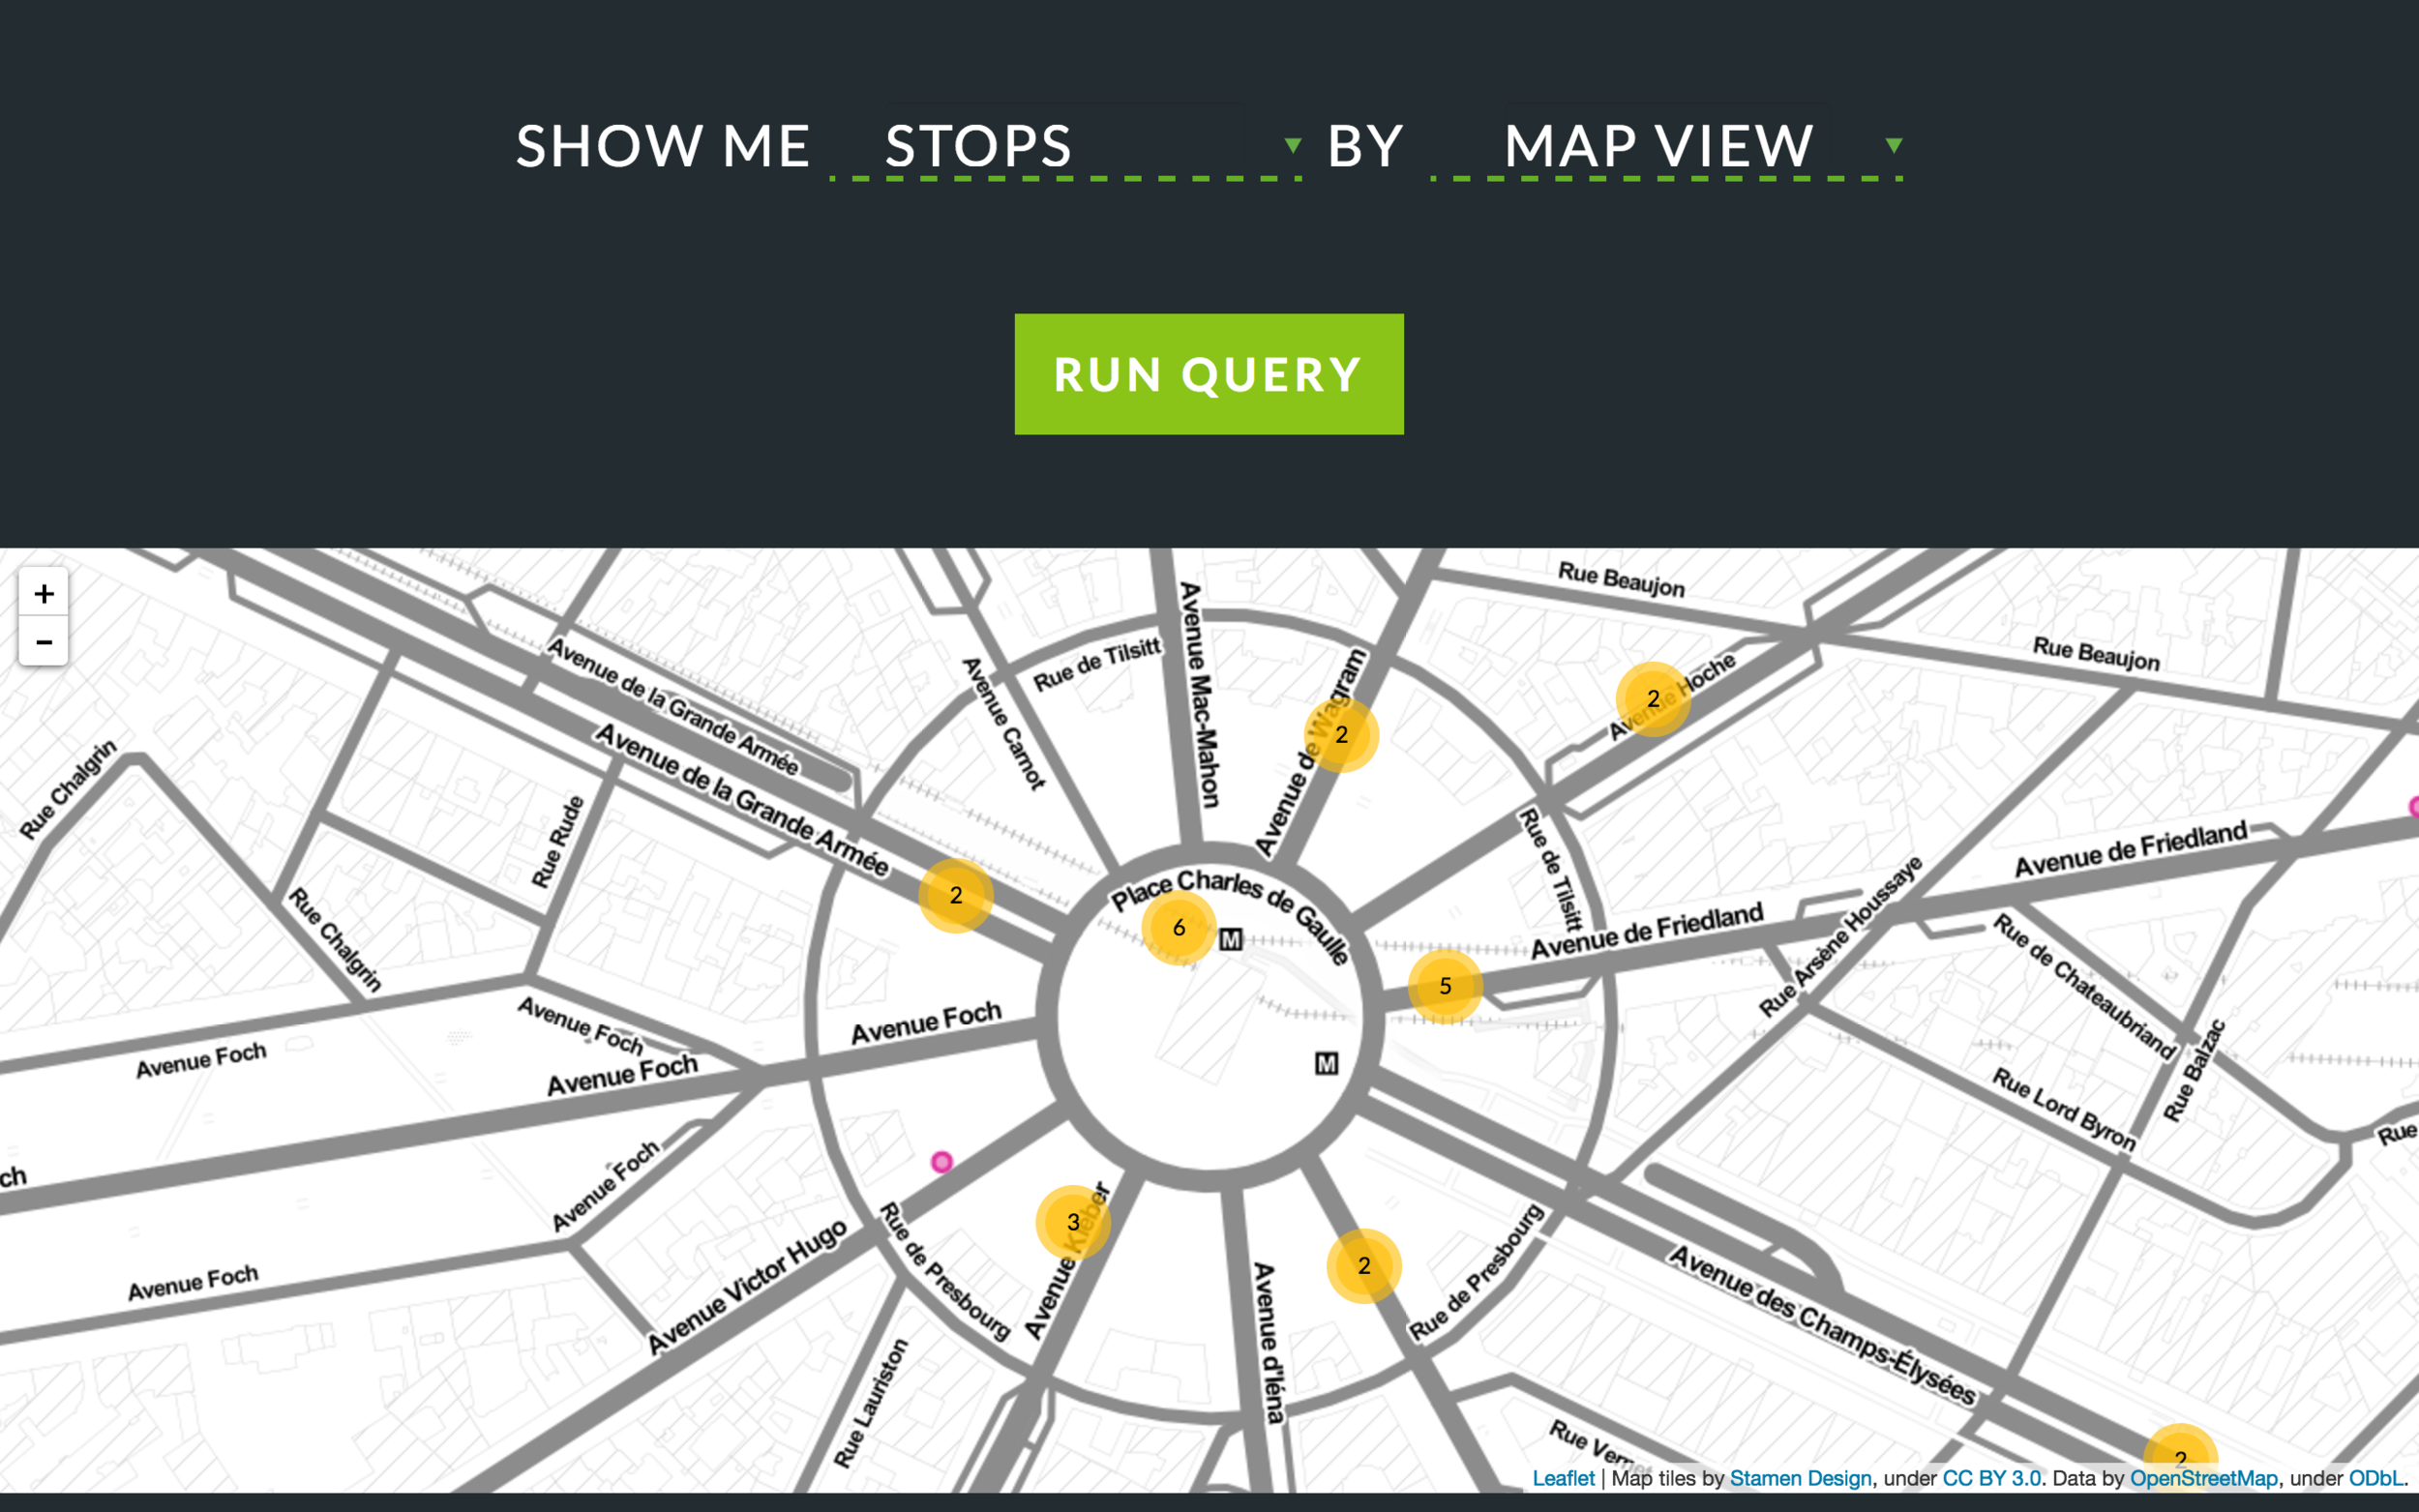 Querying for routes, stops and operators by map view